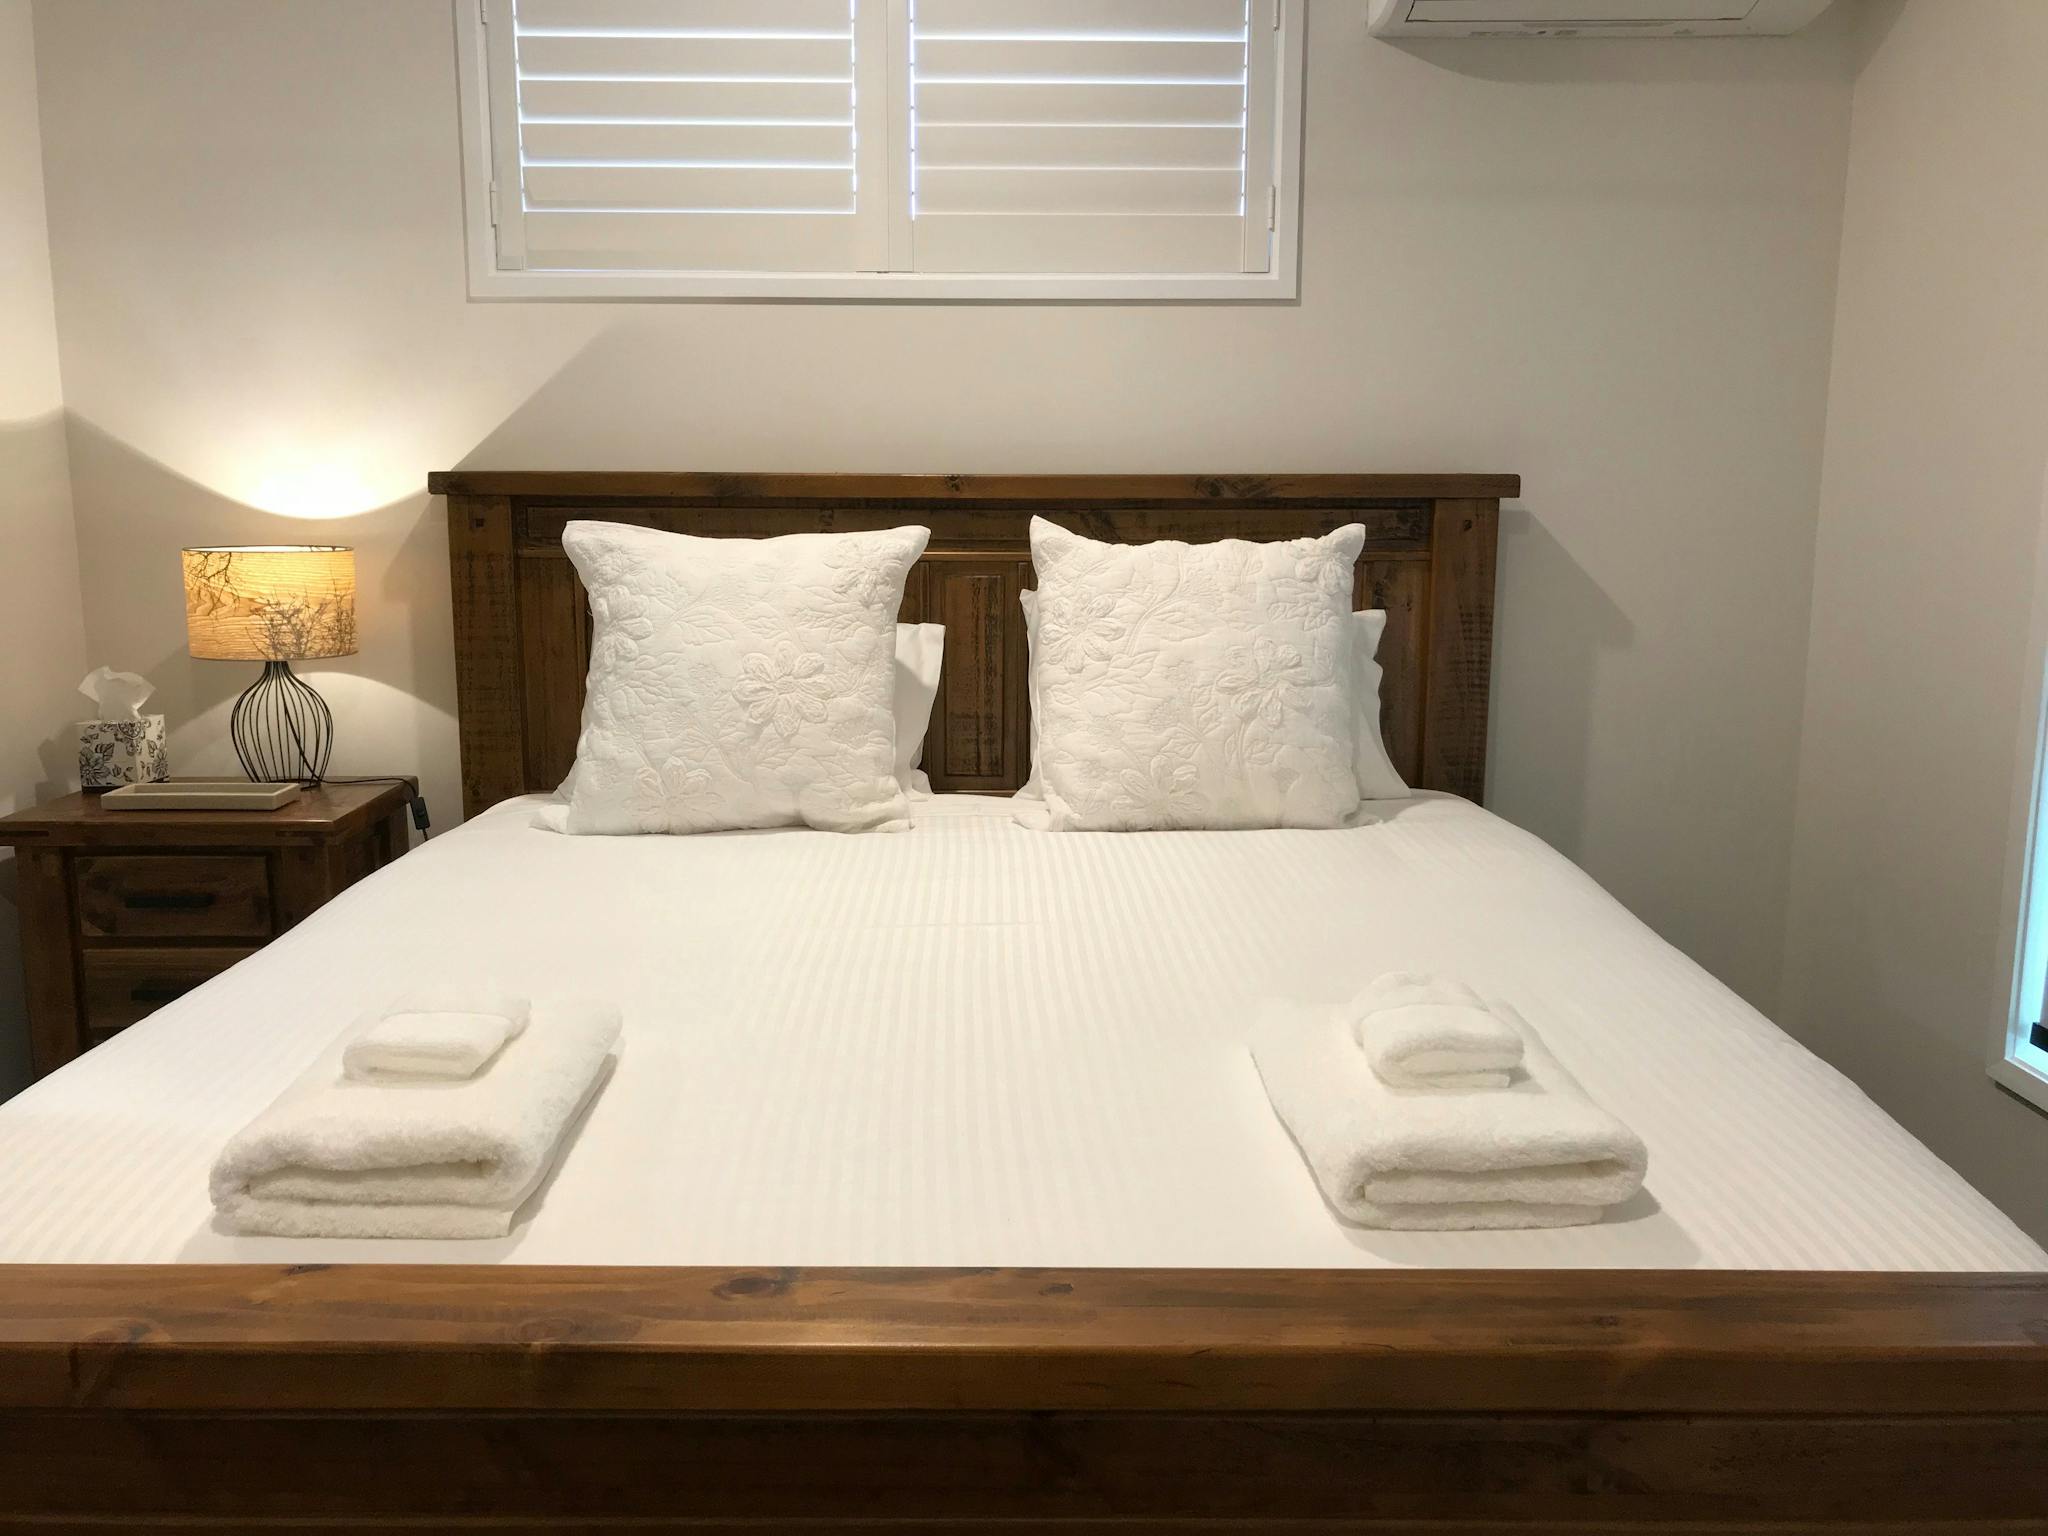 King size bed with white linen